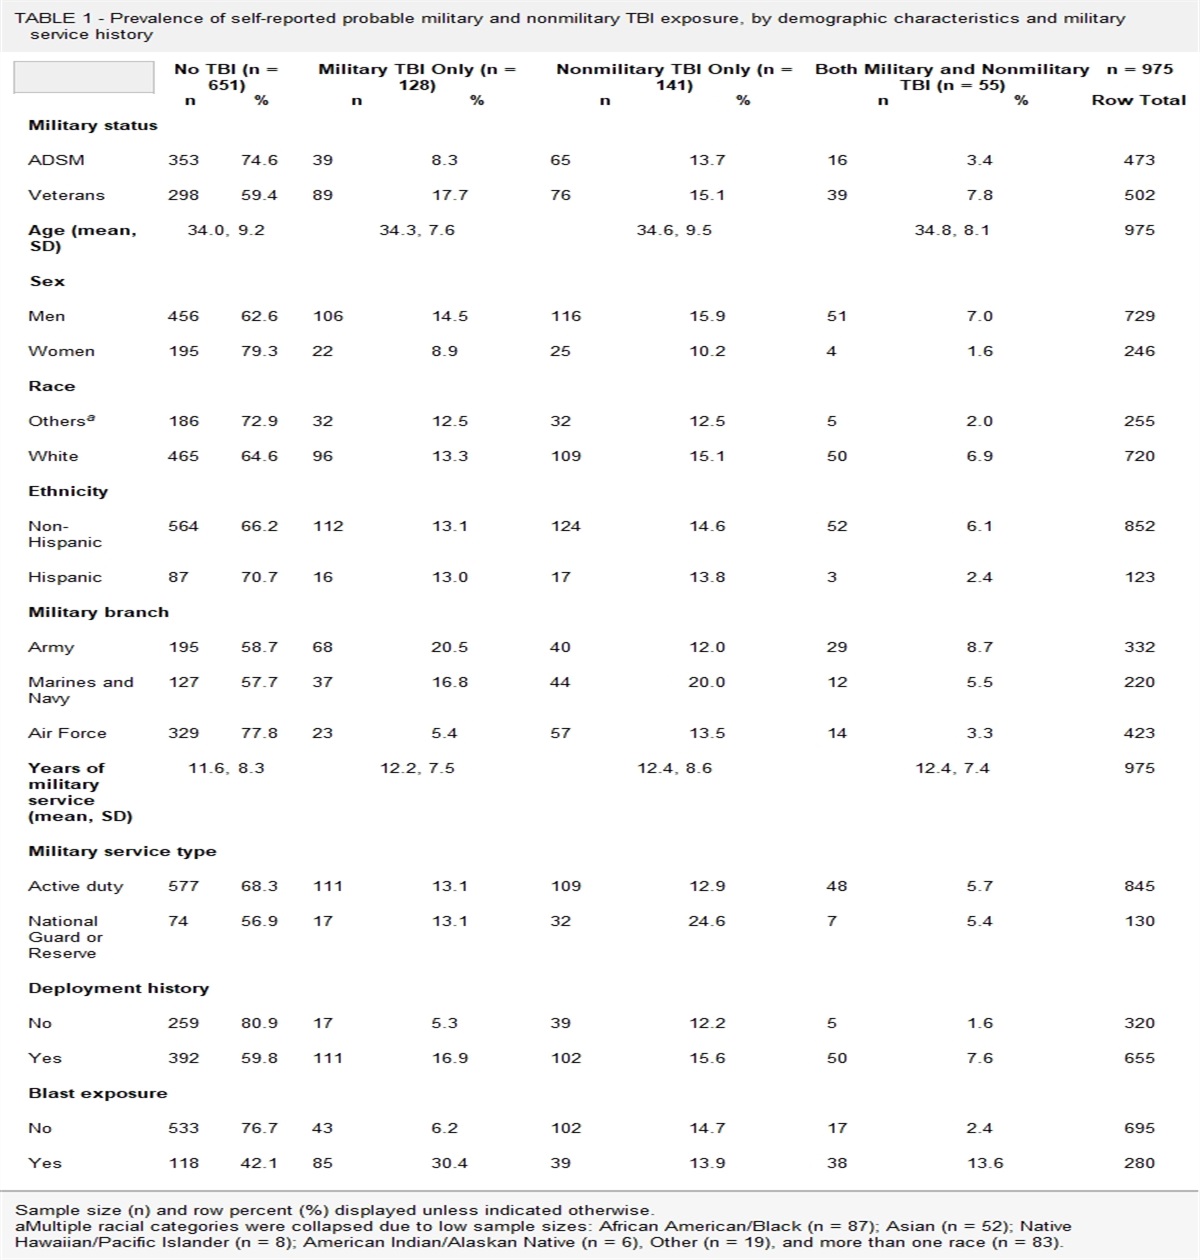 Military and Nonmilitary TBI Associations with Hearing Loss and Self-Reported Hearing Difficulty among Active-Duty Service Members and Veterans